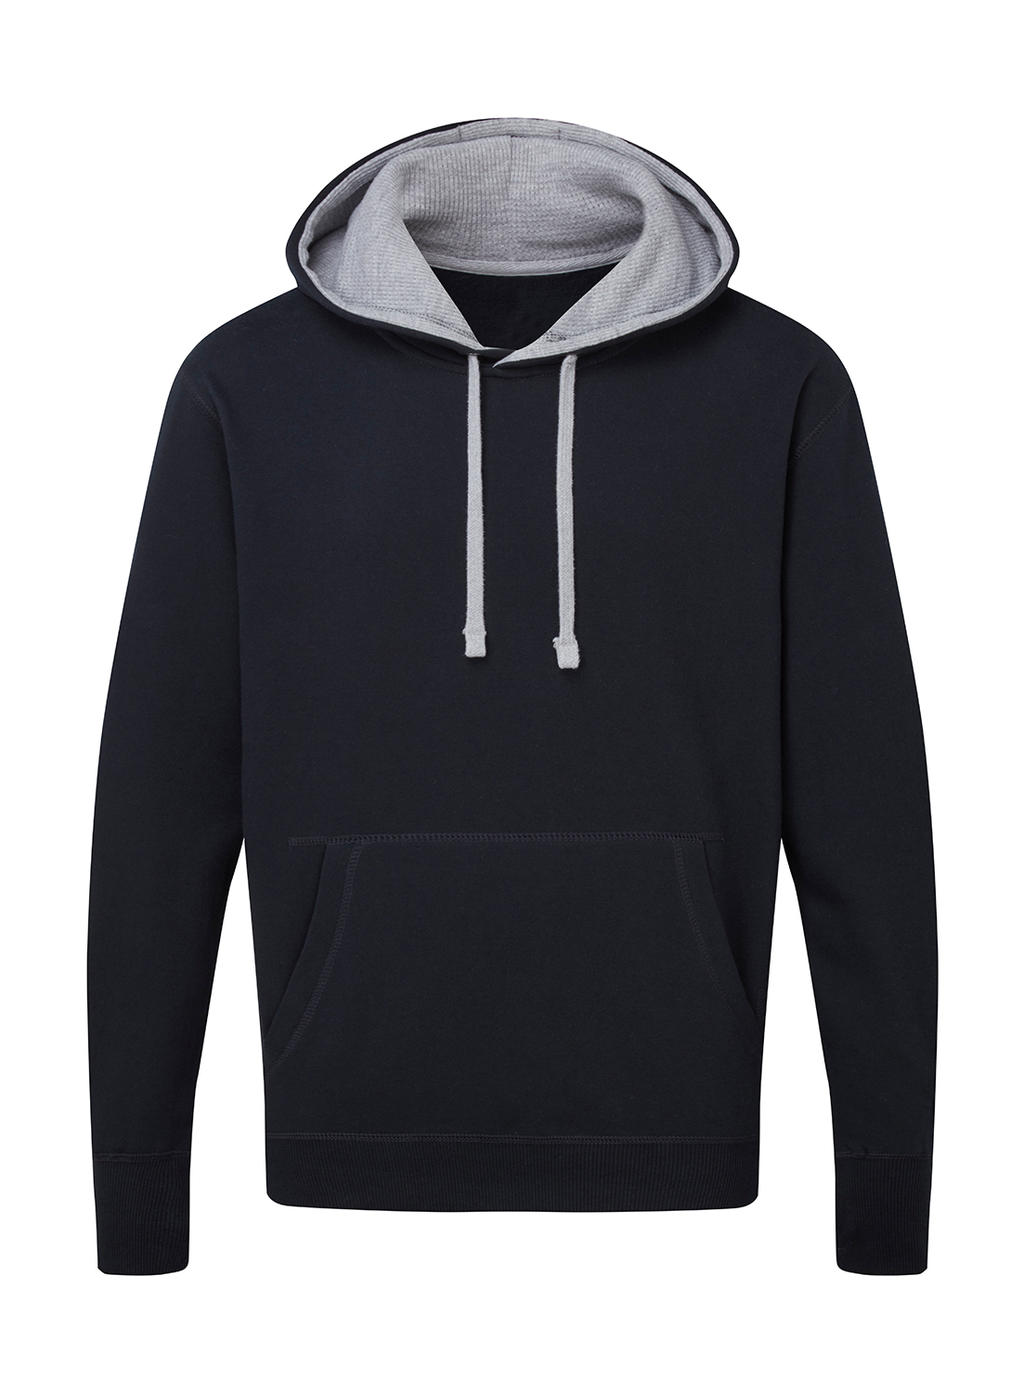  Mens Contrast Hoodie in Farbe Navy/Light Oxford